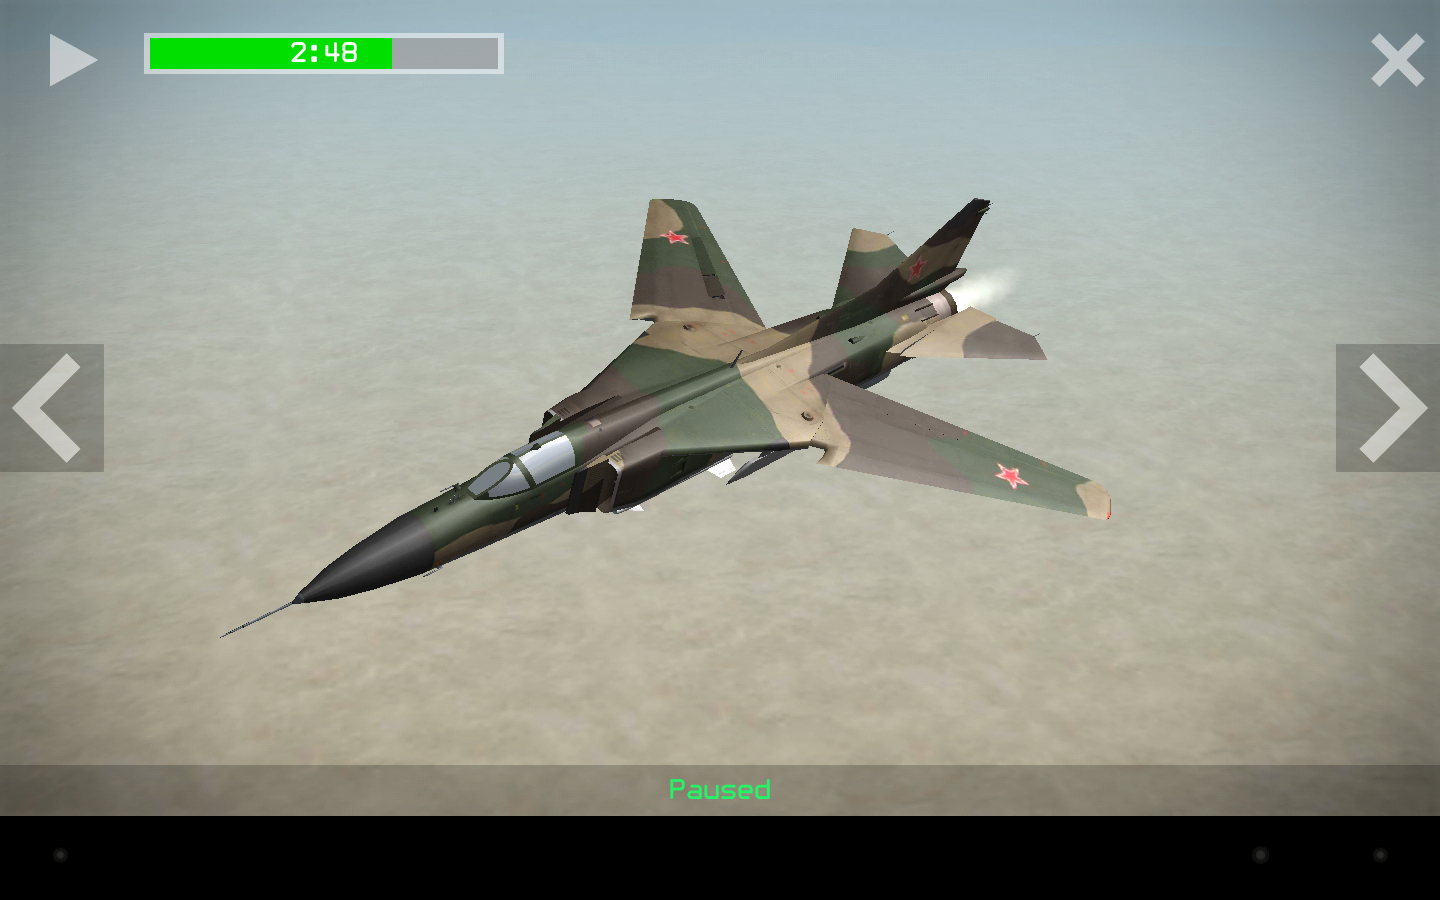 Strike Fighters 1.6.5 Apk [Mod Android Game]